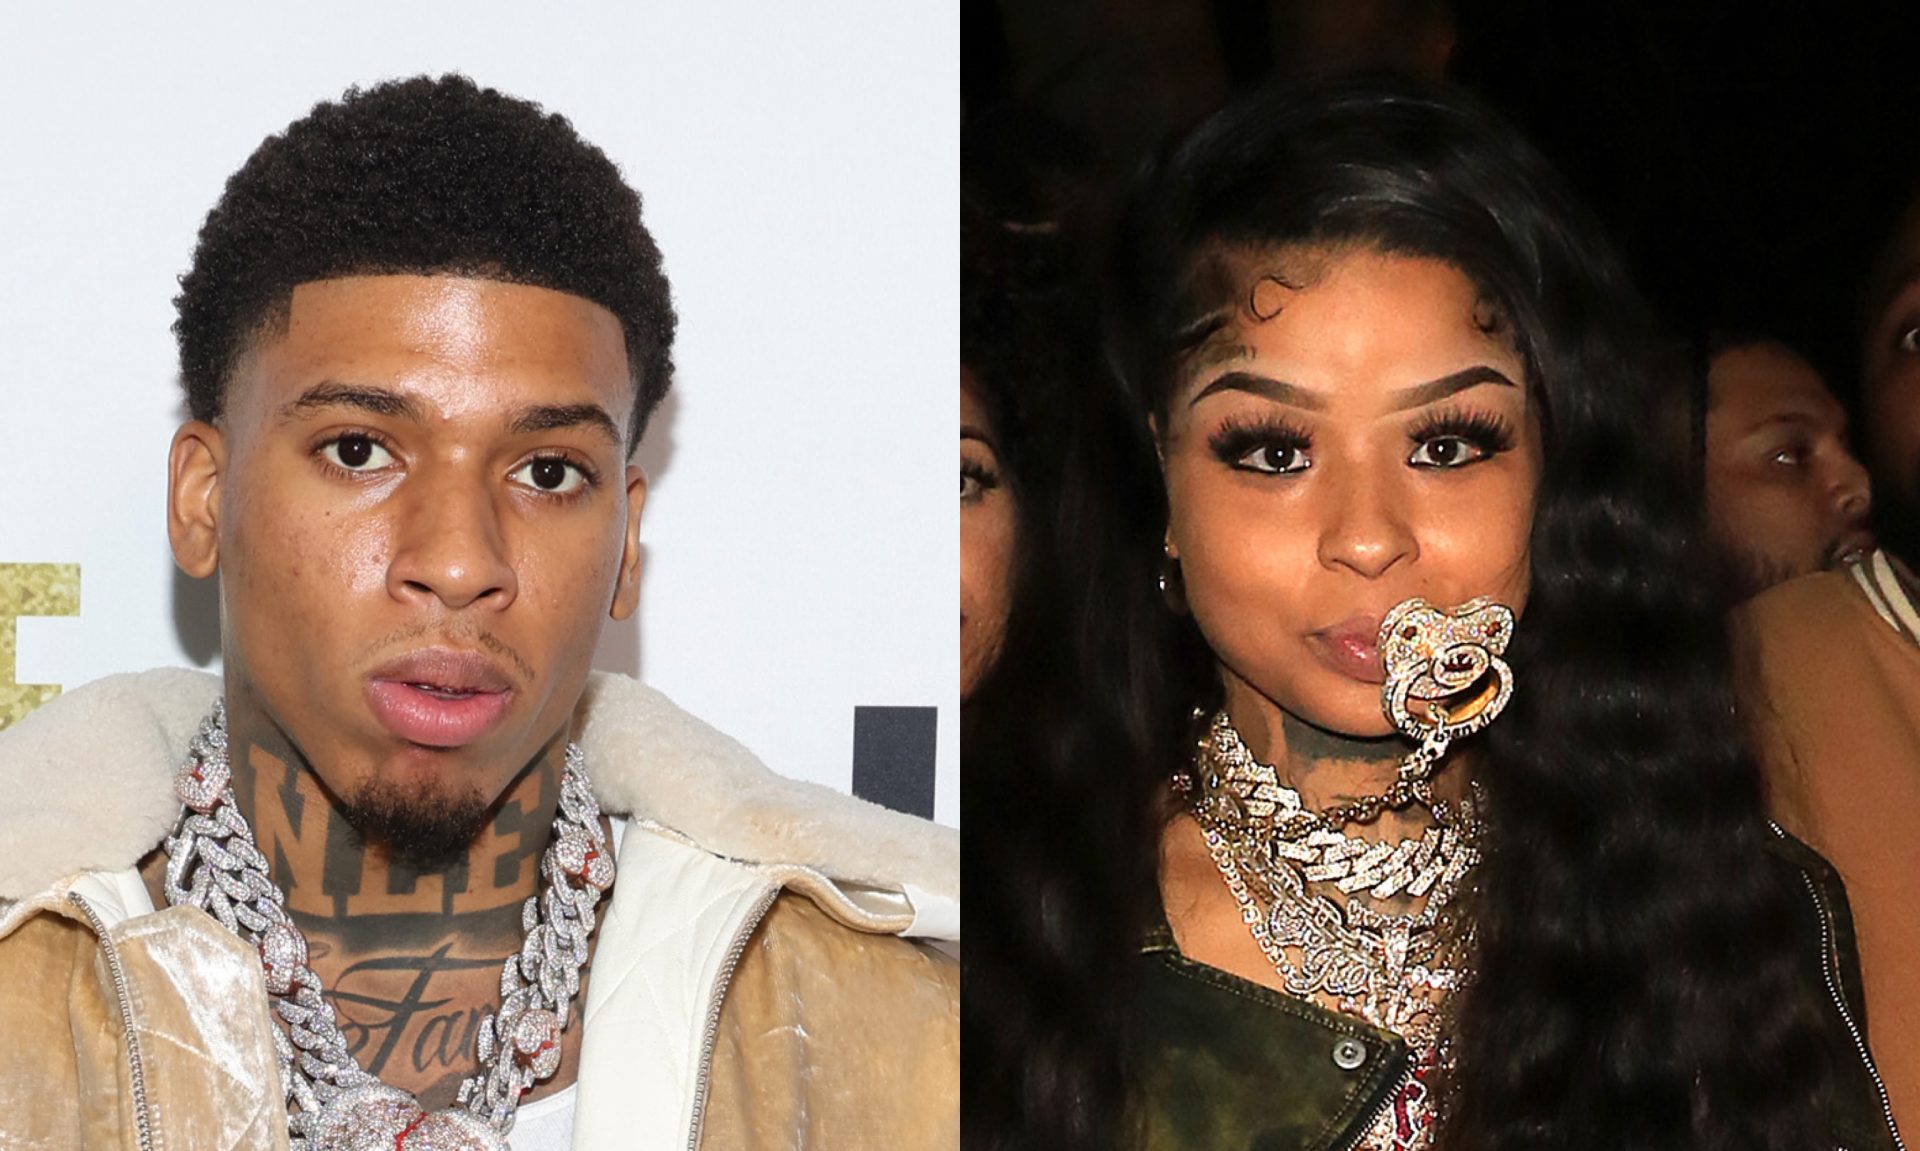 NLE Choppa Says Chrisean Rock Is “Iconic” & Speaks On His Face Tattoo Of Her (Exclusive Video)